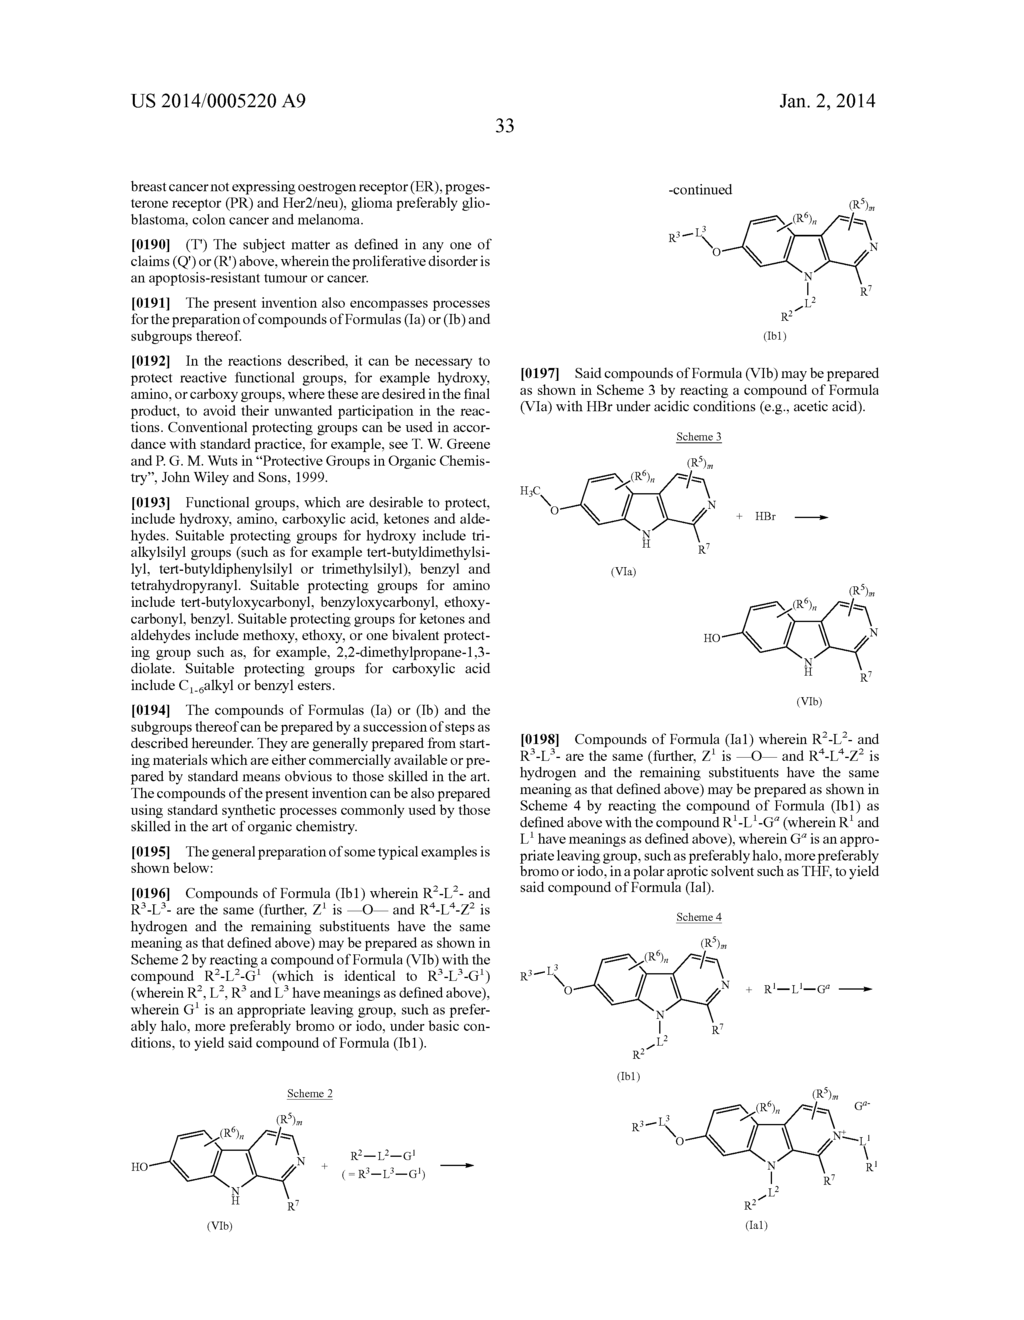 BETA CARBOLINE DERIVATIVES USEFUL IN THE TREATMENT OF PROLIFERATIVE     DISORDERS - diagram, schematic, and image 37